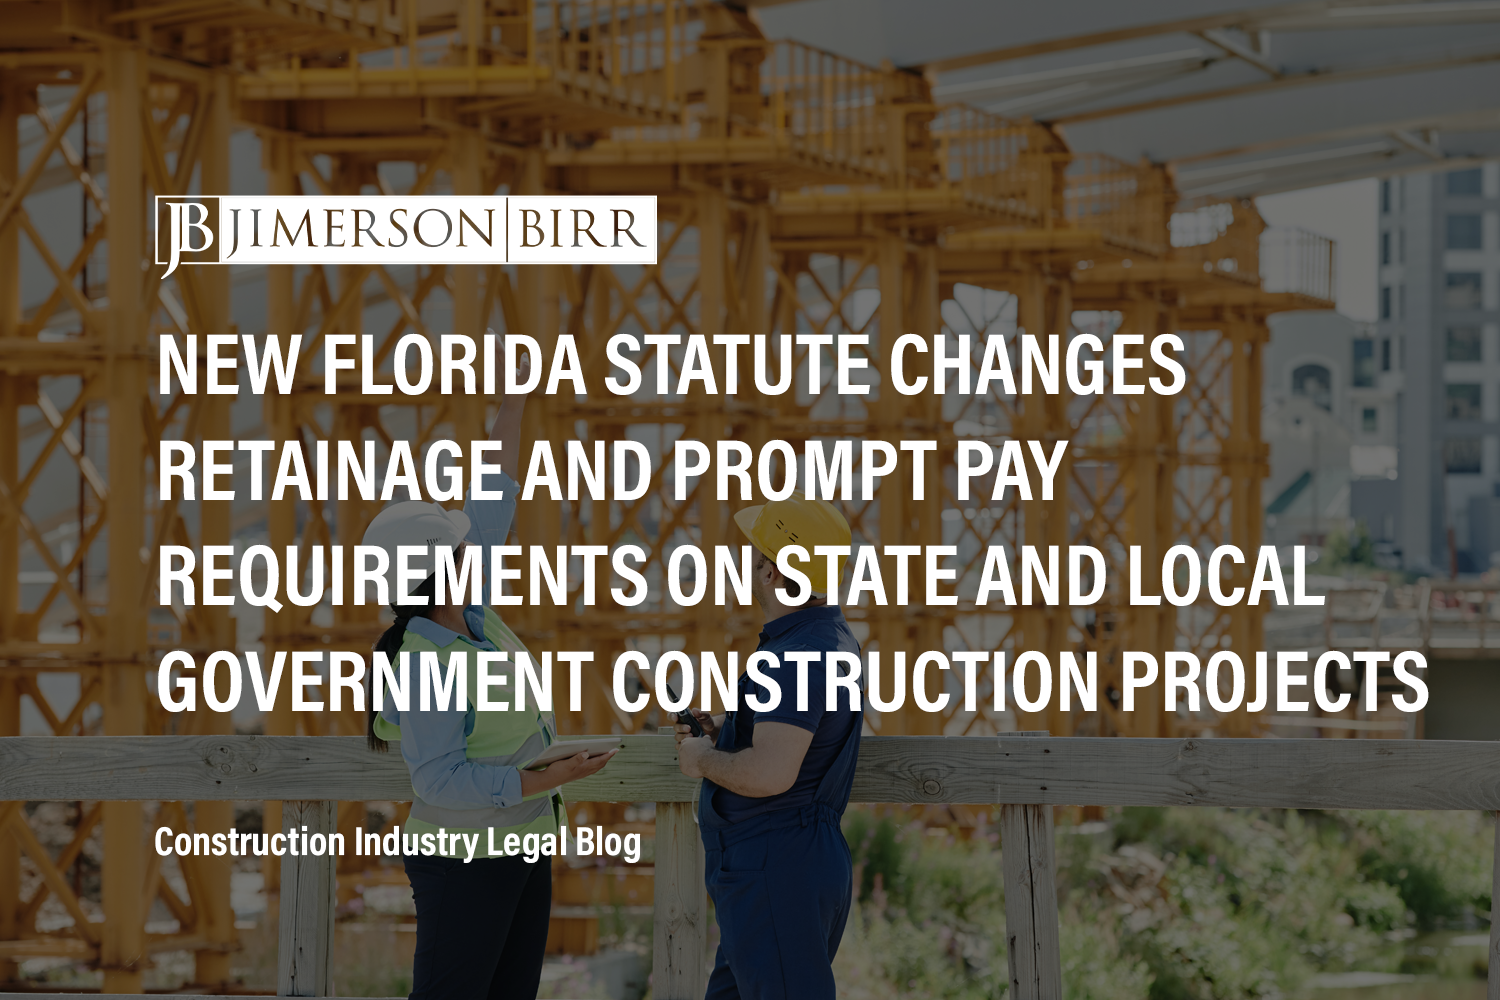 New Florida Statute Changes Retainage and Prompt Pay Requirements on State and Local Government Construction Projects